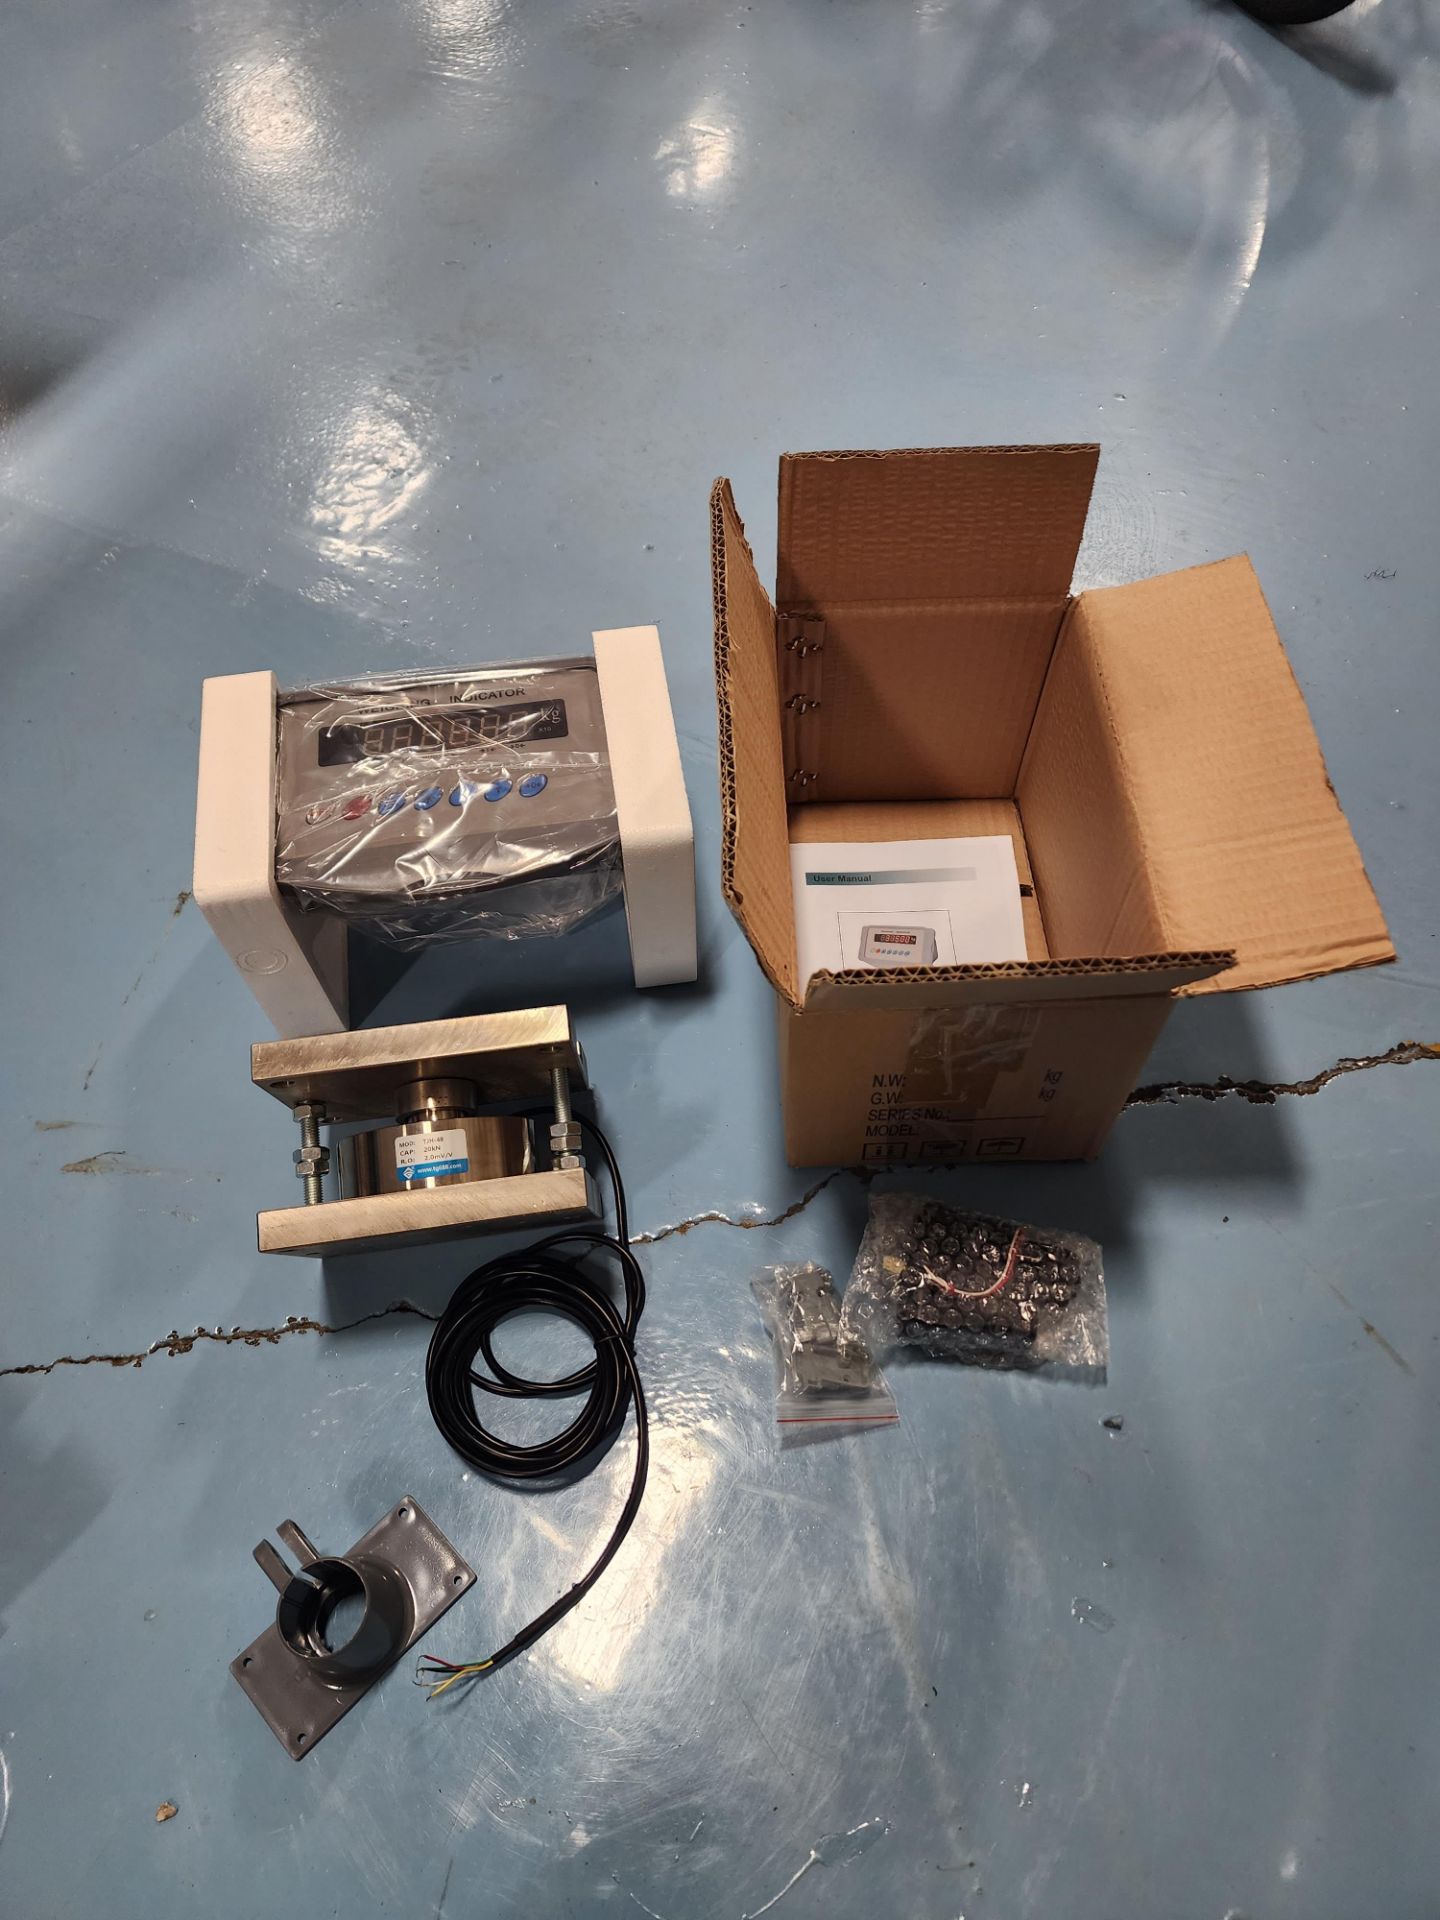 Unused Load Cell With Digital Readout